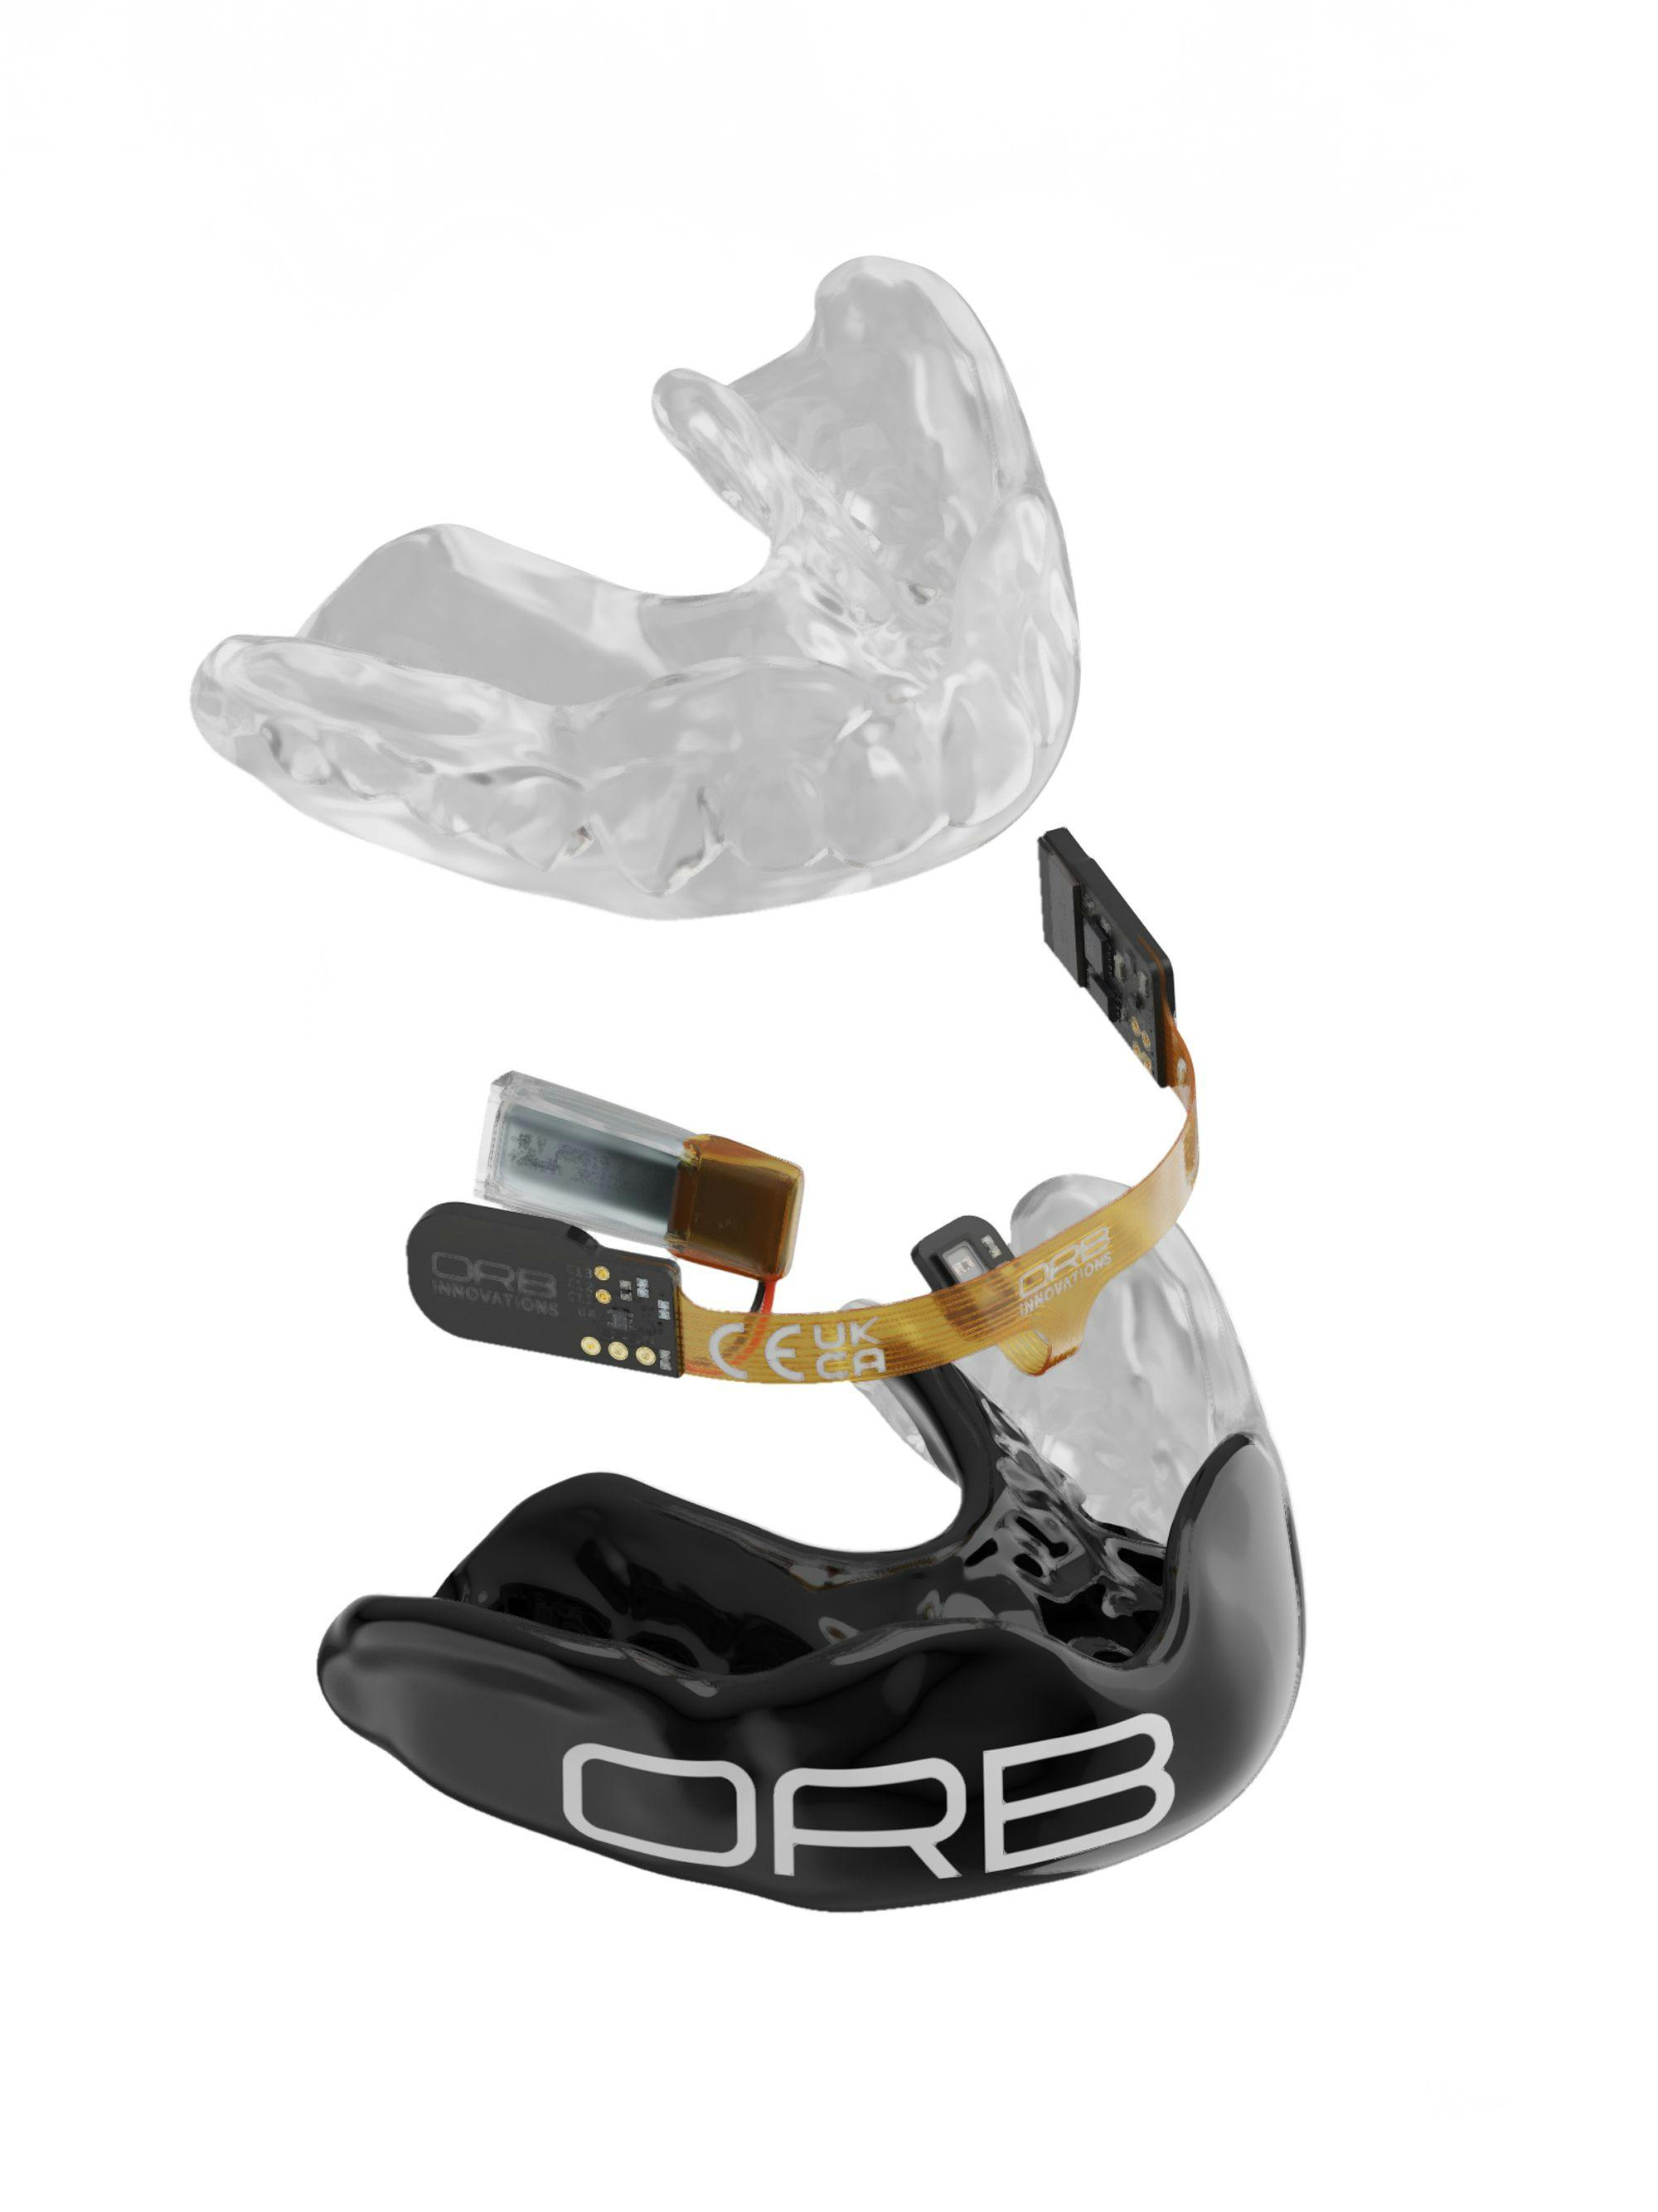 Glidewell Acquires ORB Innovations for Oral Appliances. Image: © ORB Innovations